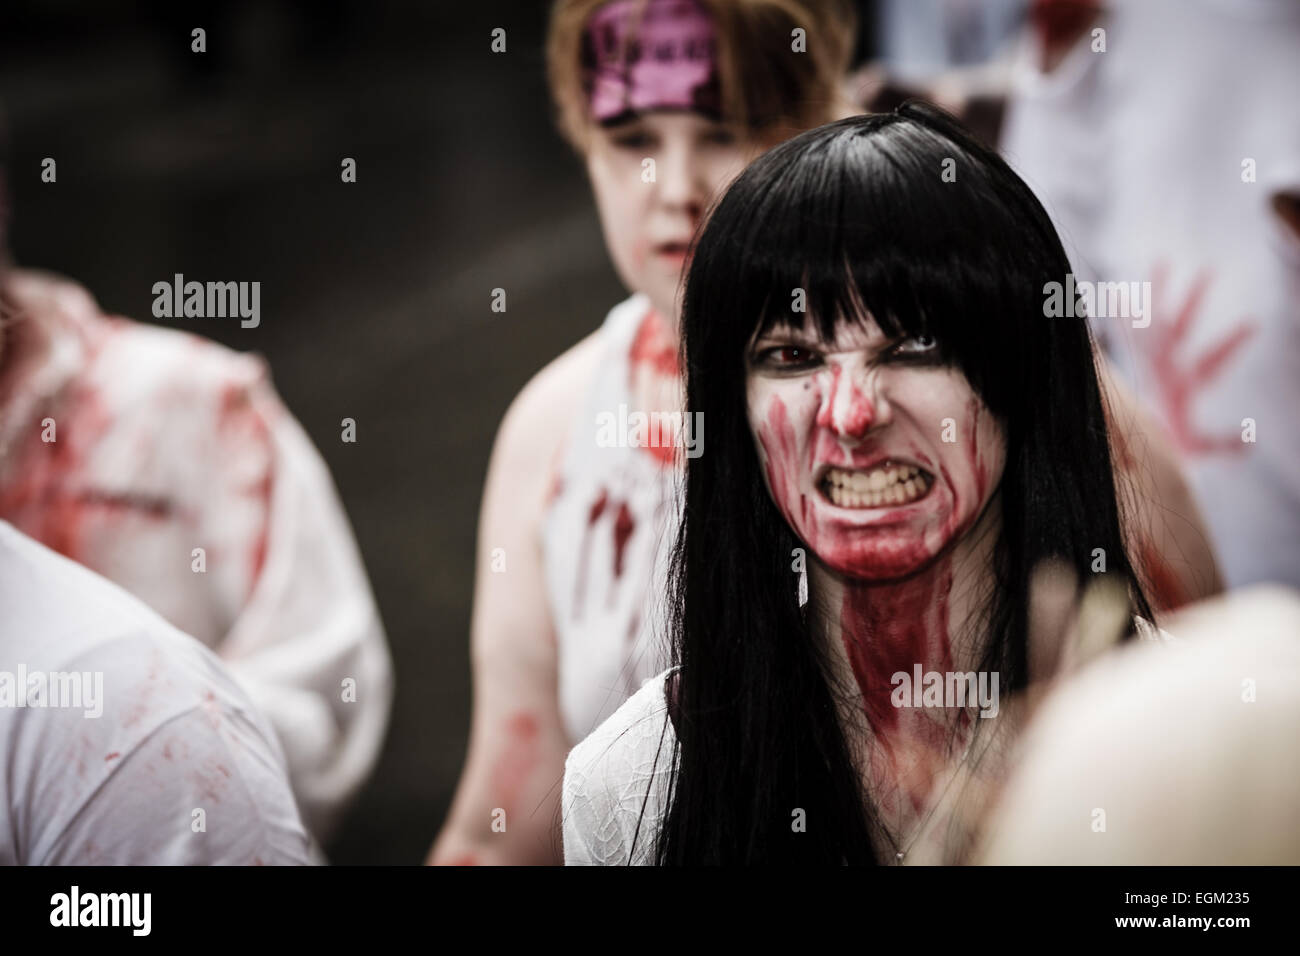 Scary zombie walk event in the center of the town of Hämeenlinna in Finland. Stock Photo